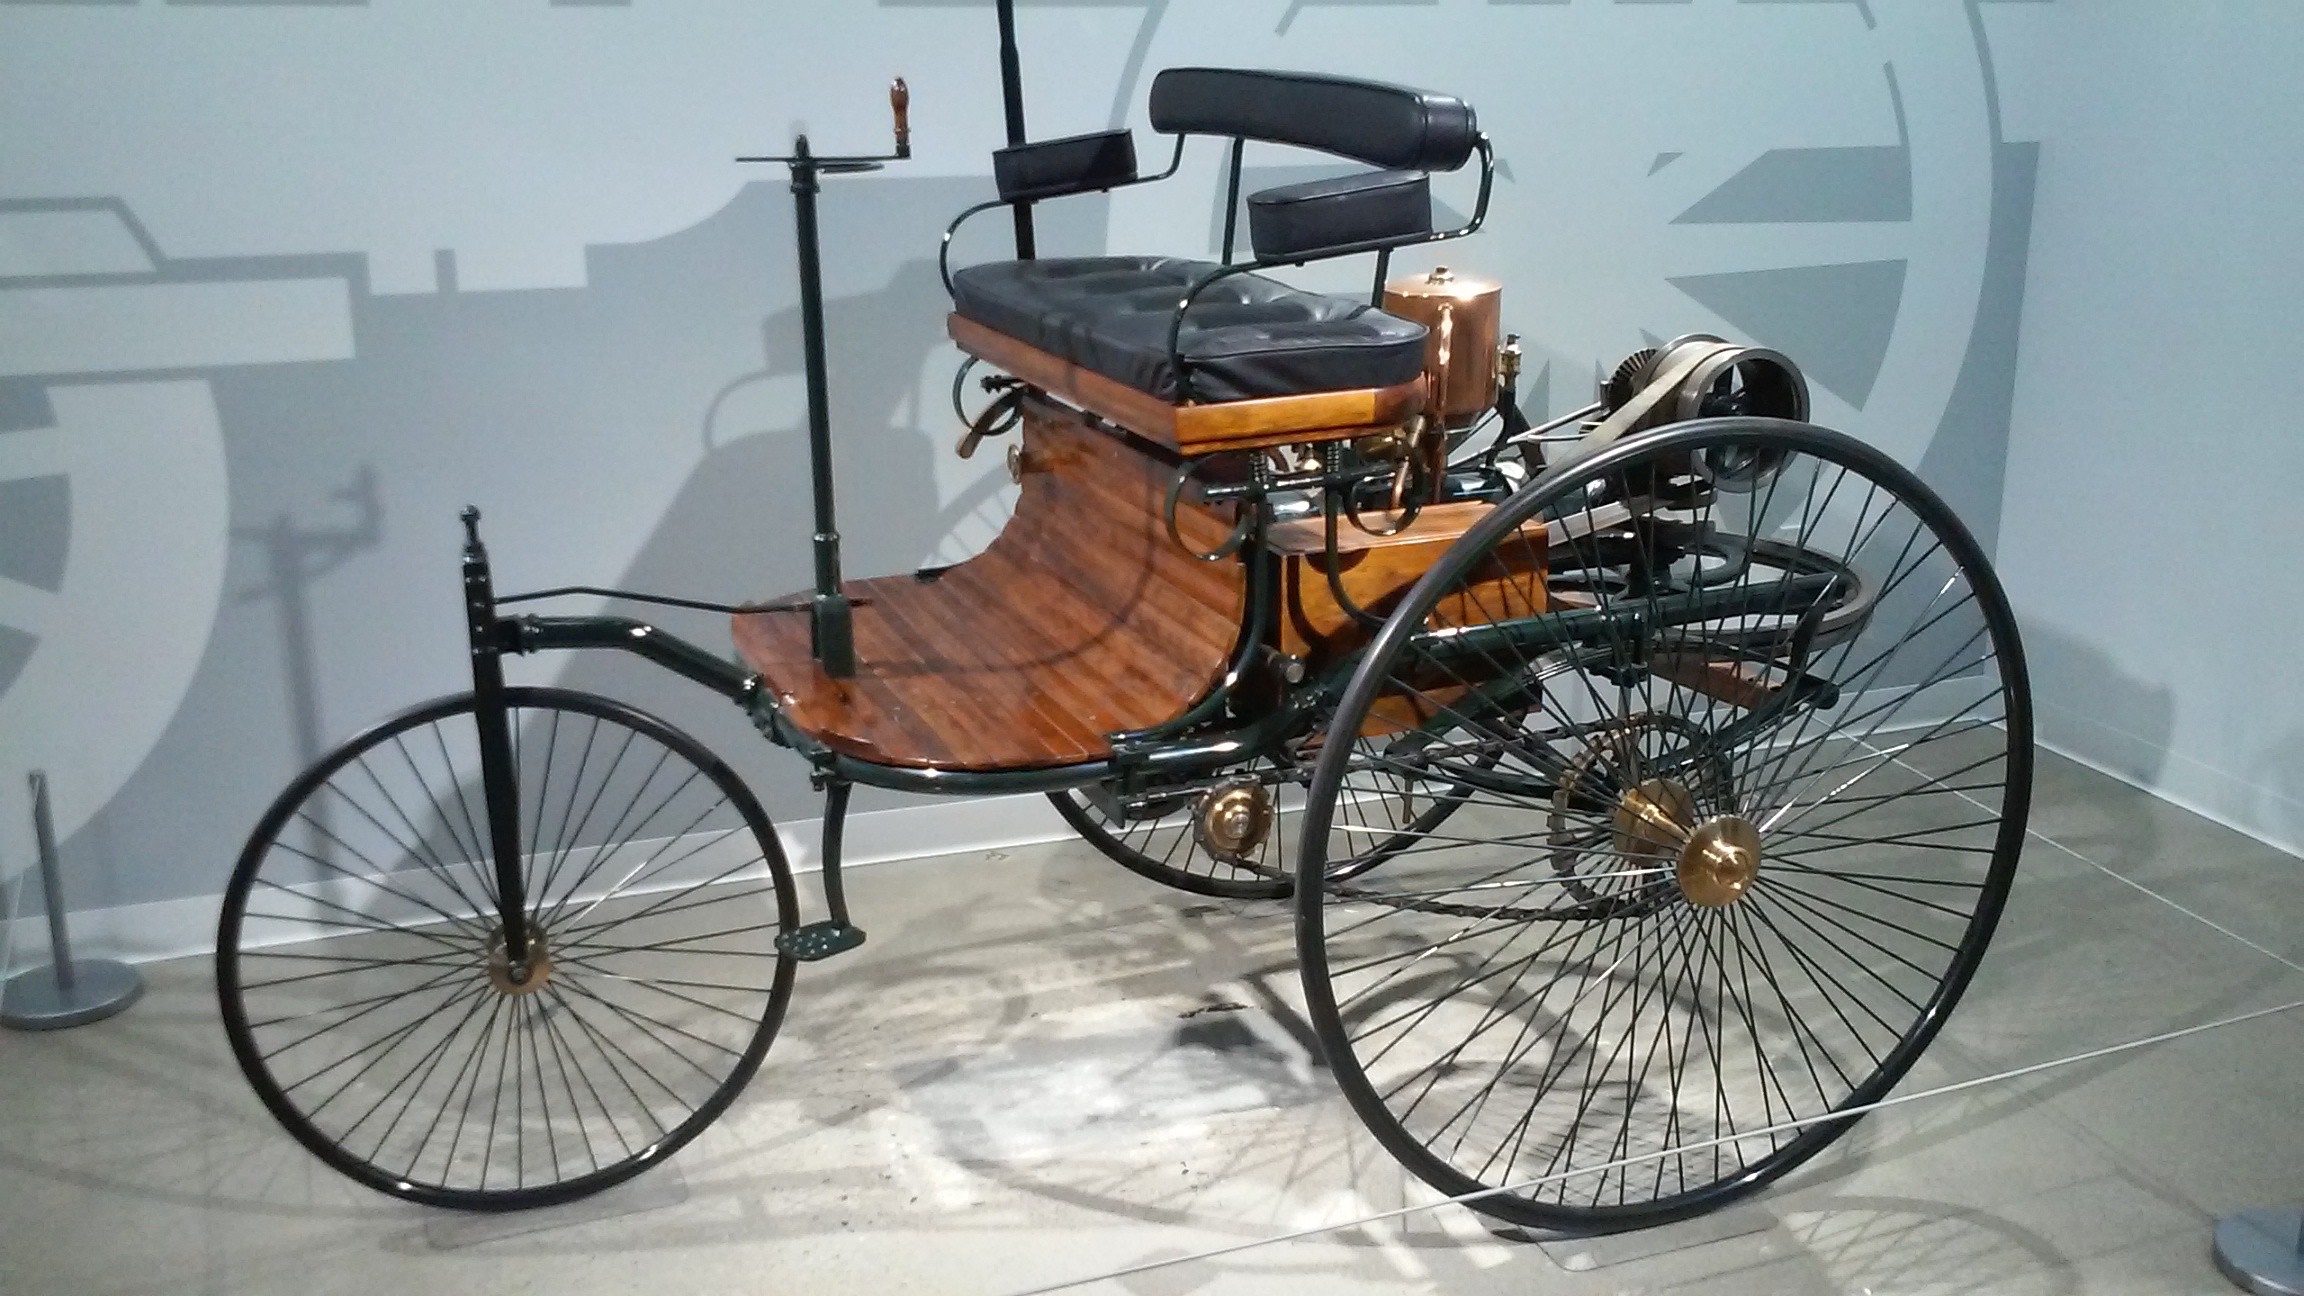 Karl Benz' 1886 Patent Motorwagen w. Four-Stoke, Water-Cooled Internal Combustion Engine, Electrical Ignition and Rack & Pinion Steering. Photo by Author from Peterson Automotive Museum, Los Angeles